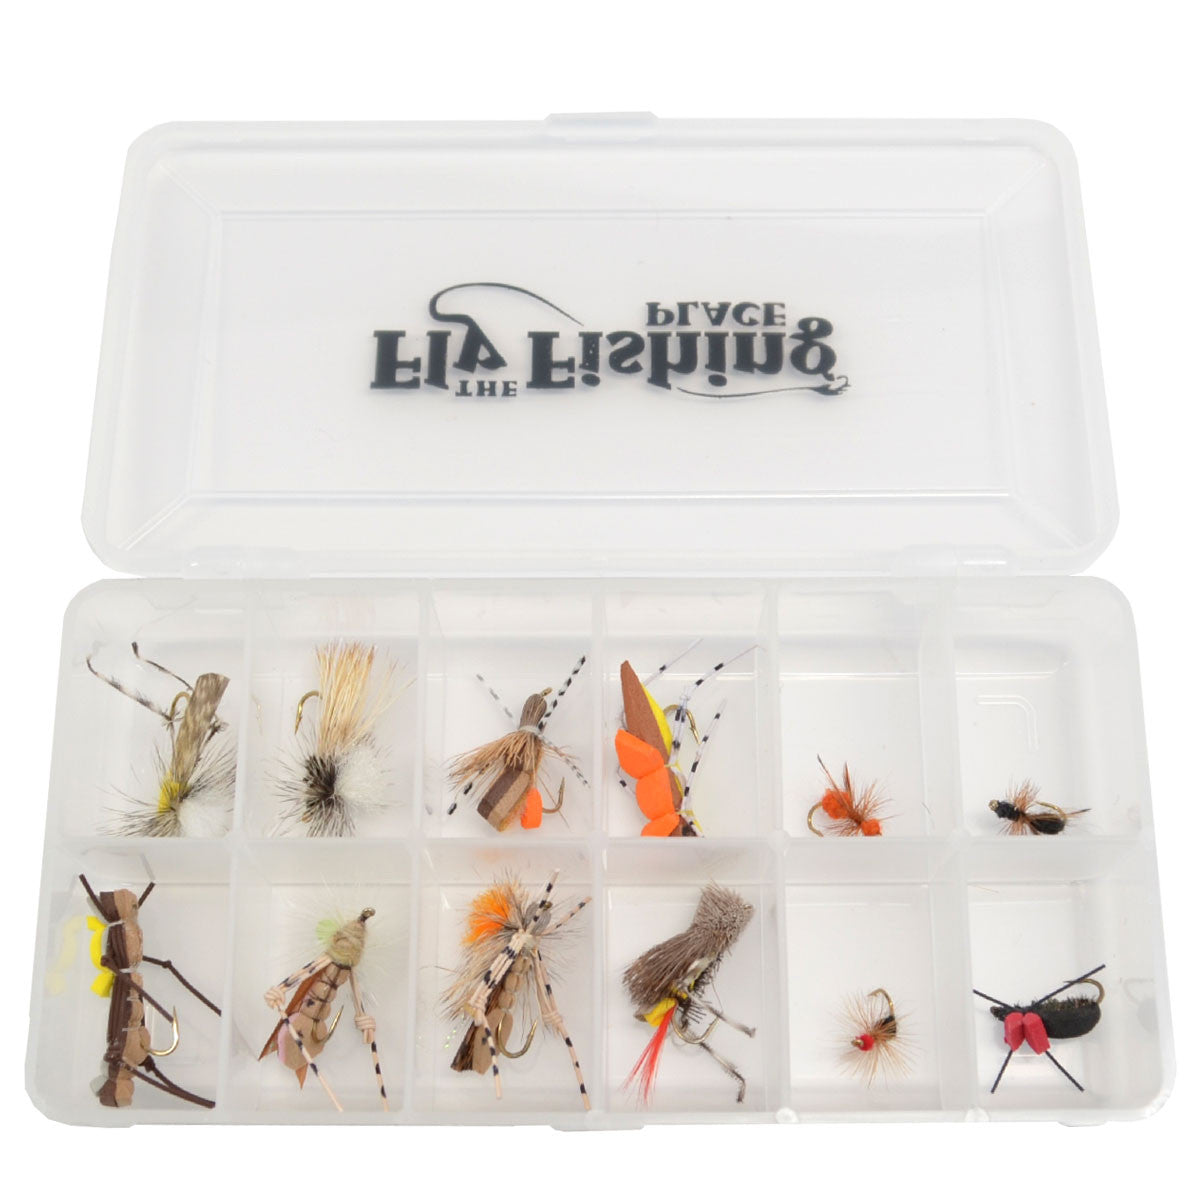 Trout Fly Assortment - Terrestrials Fly Fishing Flies Collection - Includes  Foam Hoppers, Ants, Beetles, and Cicadas